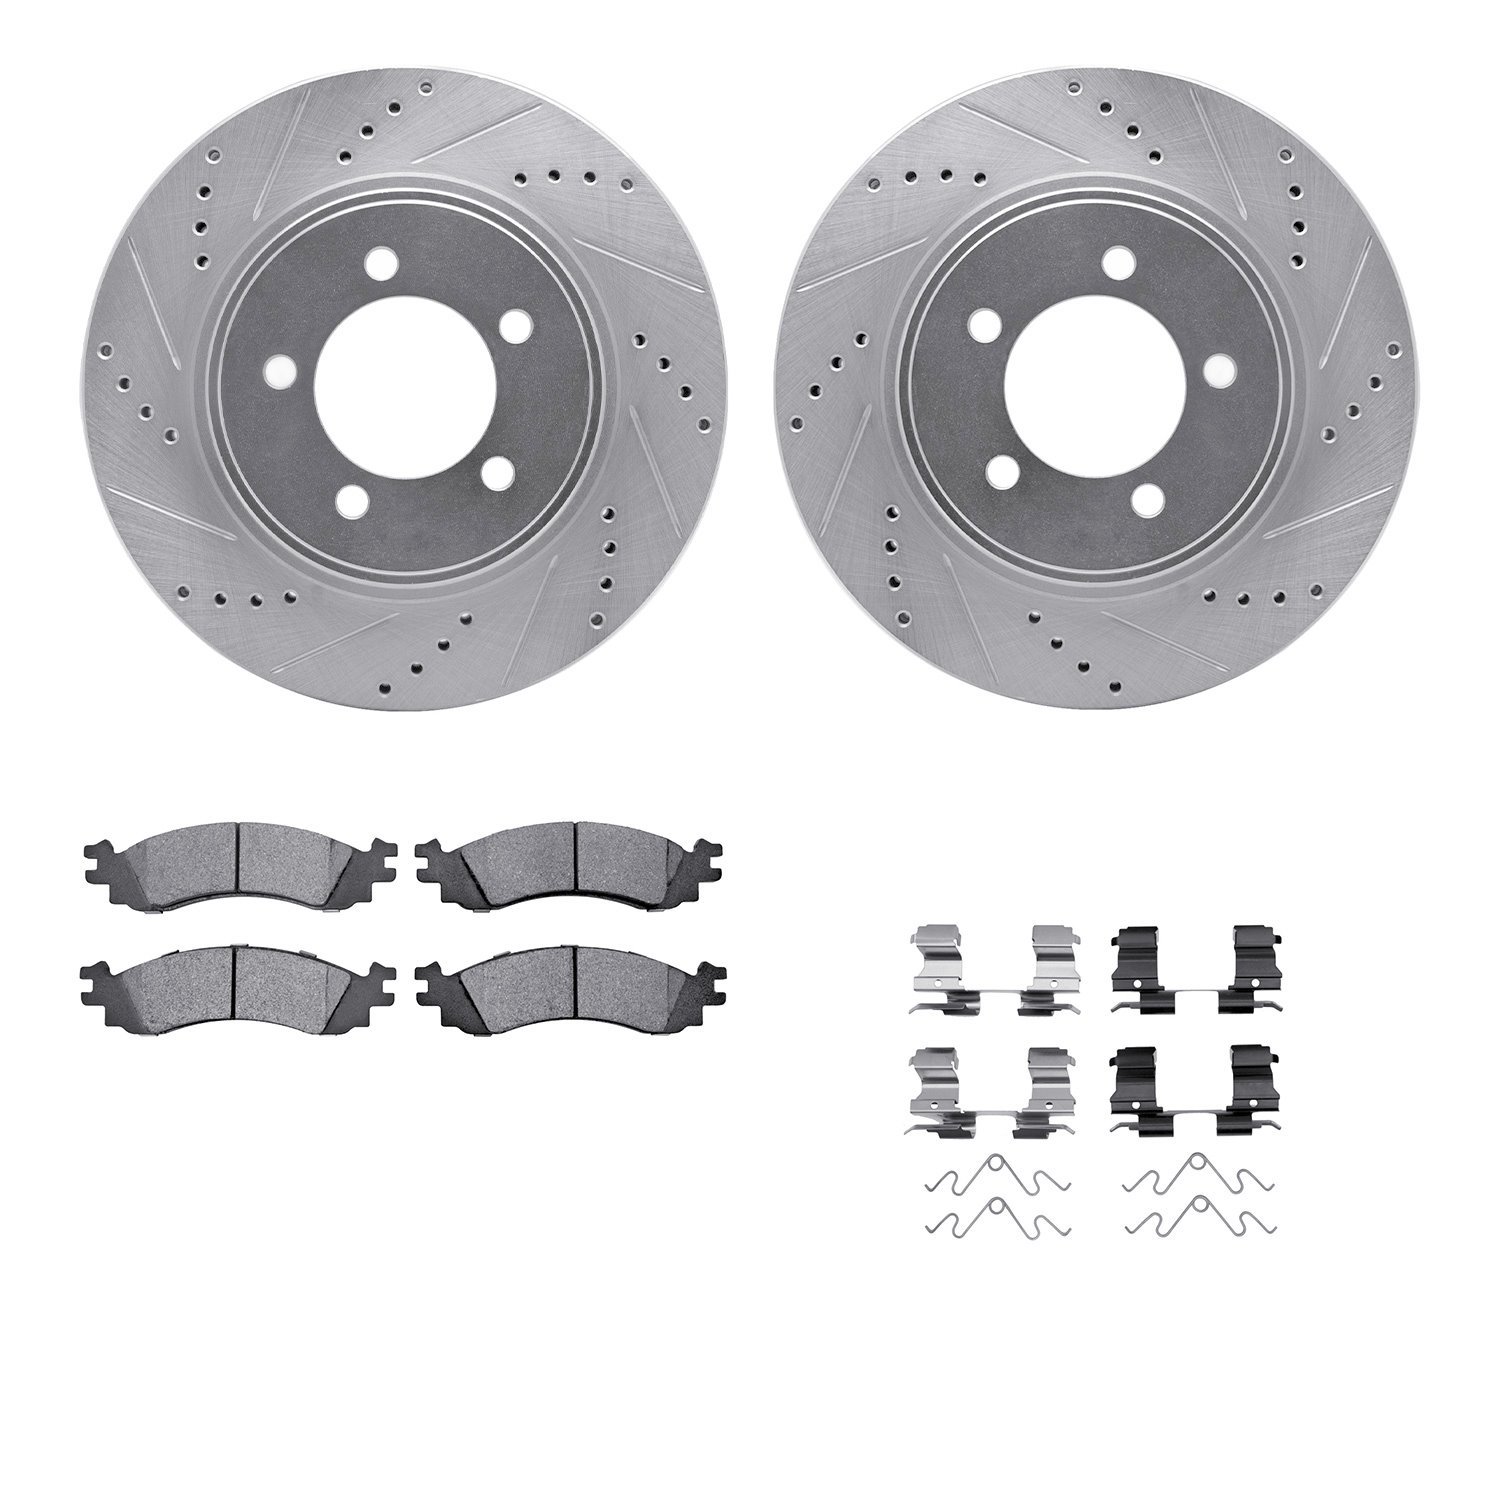 7212-54008 Drilled/Slotted Rotors w/Heavy-Duty Brake Pads Kit & Hardware [Silver], 2006-2010 Ford/Lincoln/Mercury/Mazda, Positio